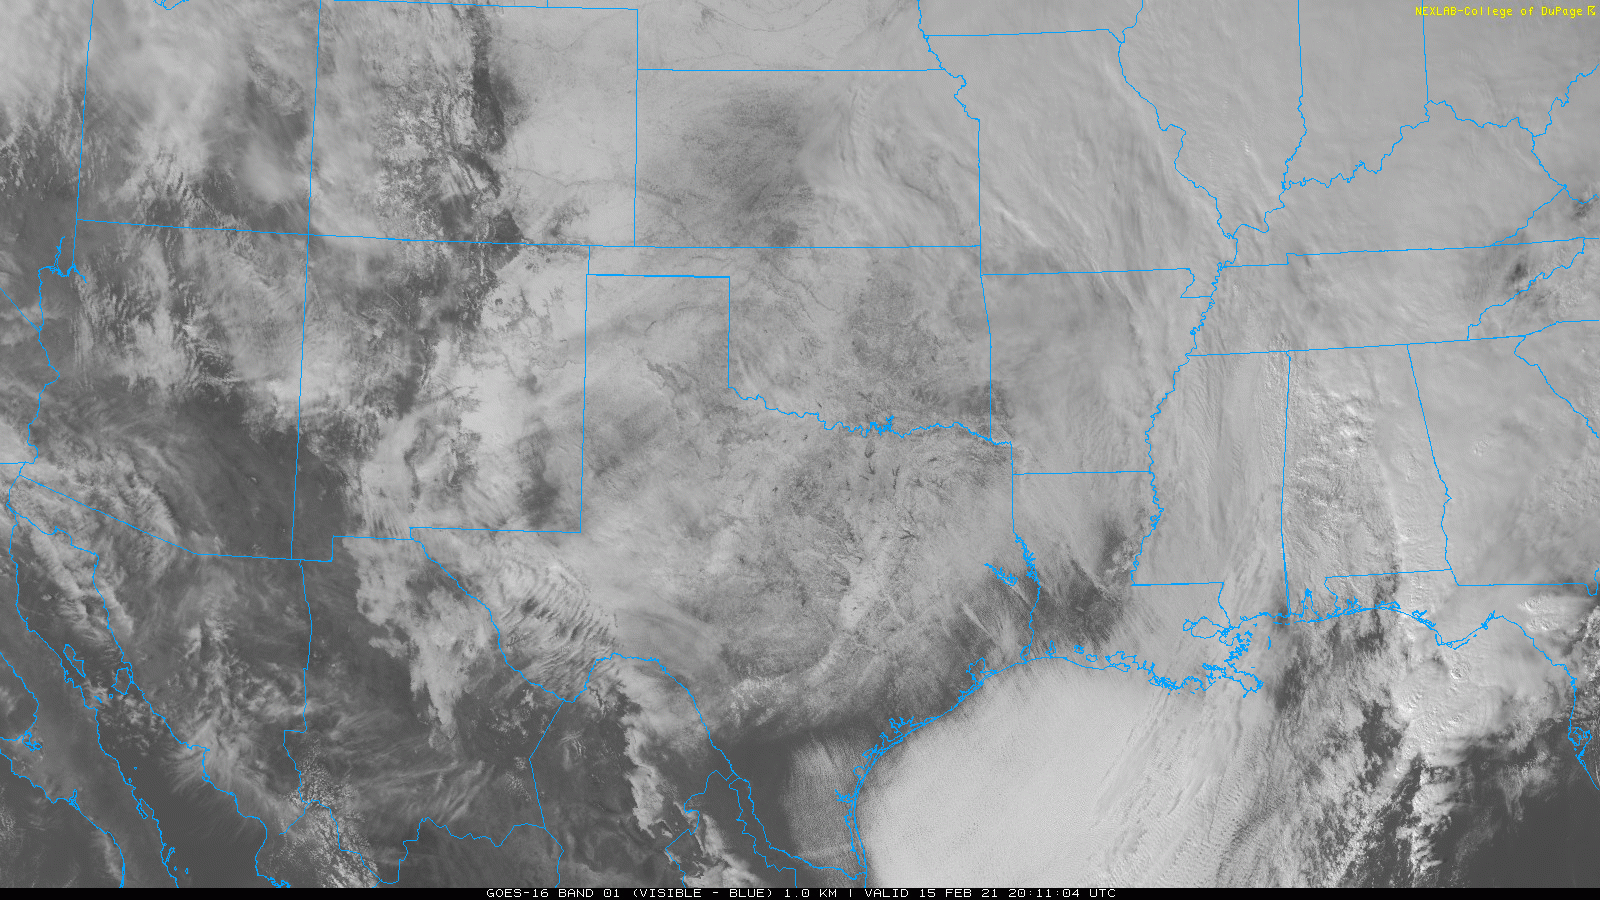 Visible satellite animation taken by�GOES-16 between 2:11 pm and 2:31 pm on 15 February 2021. On this rare mostly clear afternoon, widespread snow (stationary white areas) can be seen over much of Texas, as well as adjacent states to the north and west. The lakes and river valleys also stand out, including Palo Duro Canyon.